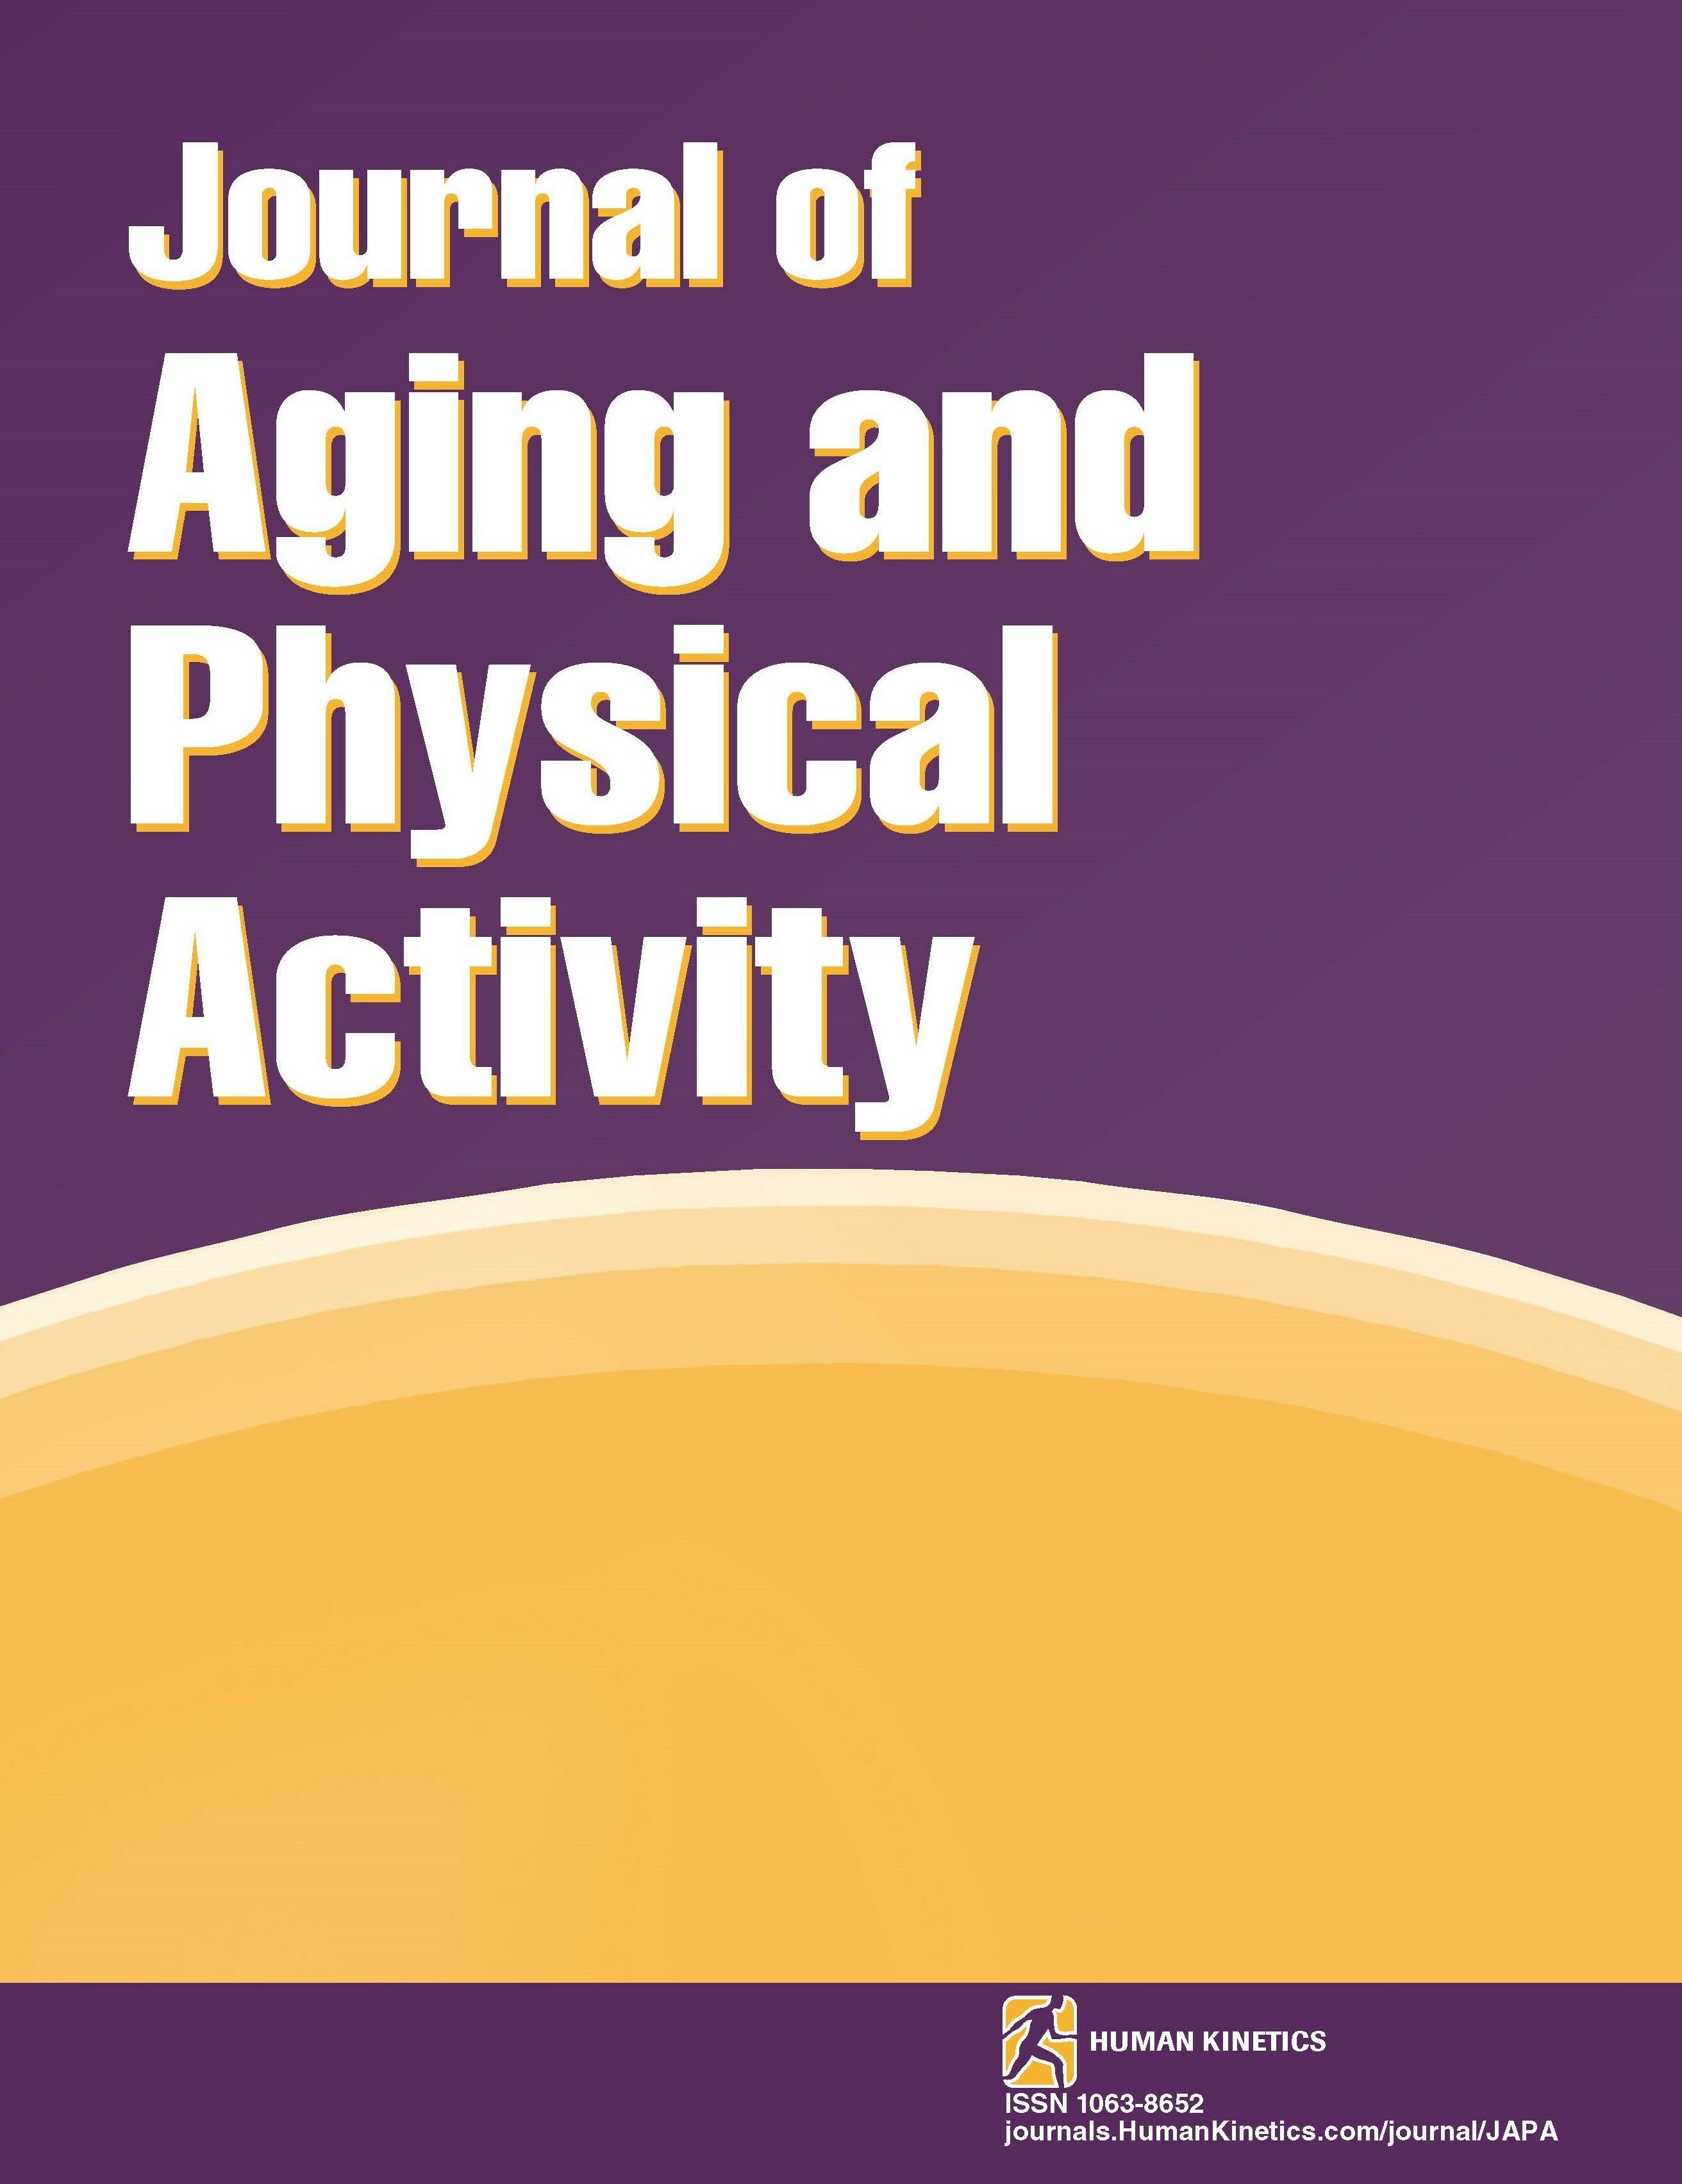 Validity of the German Version of Daily Activity Behaviours Questionnaire Among Older Adults